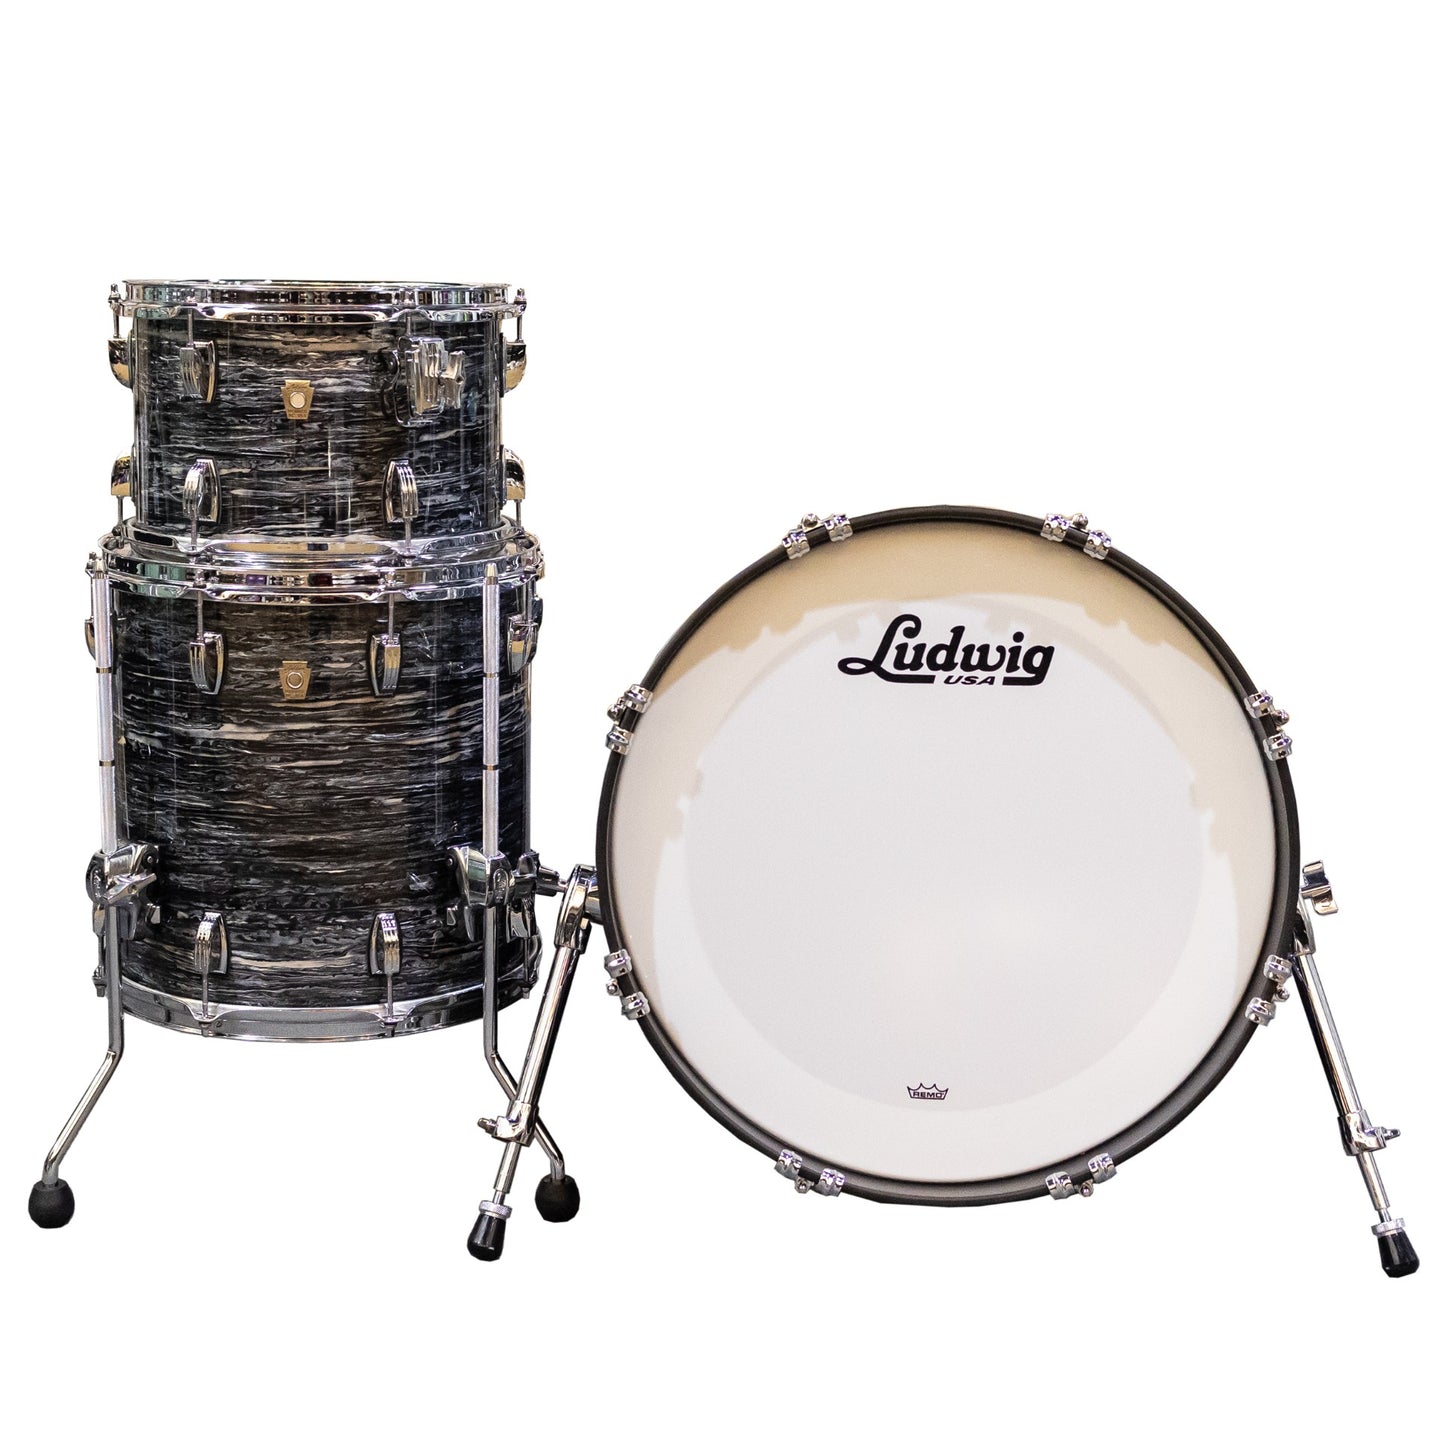 Ludwig Classic Maple 3-Piece Downbeat Shell Pack - Vintage Black Oyster